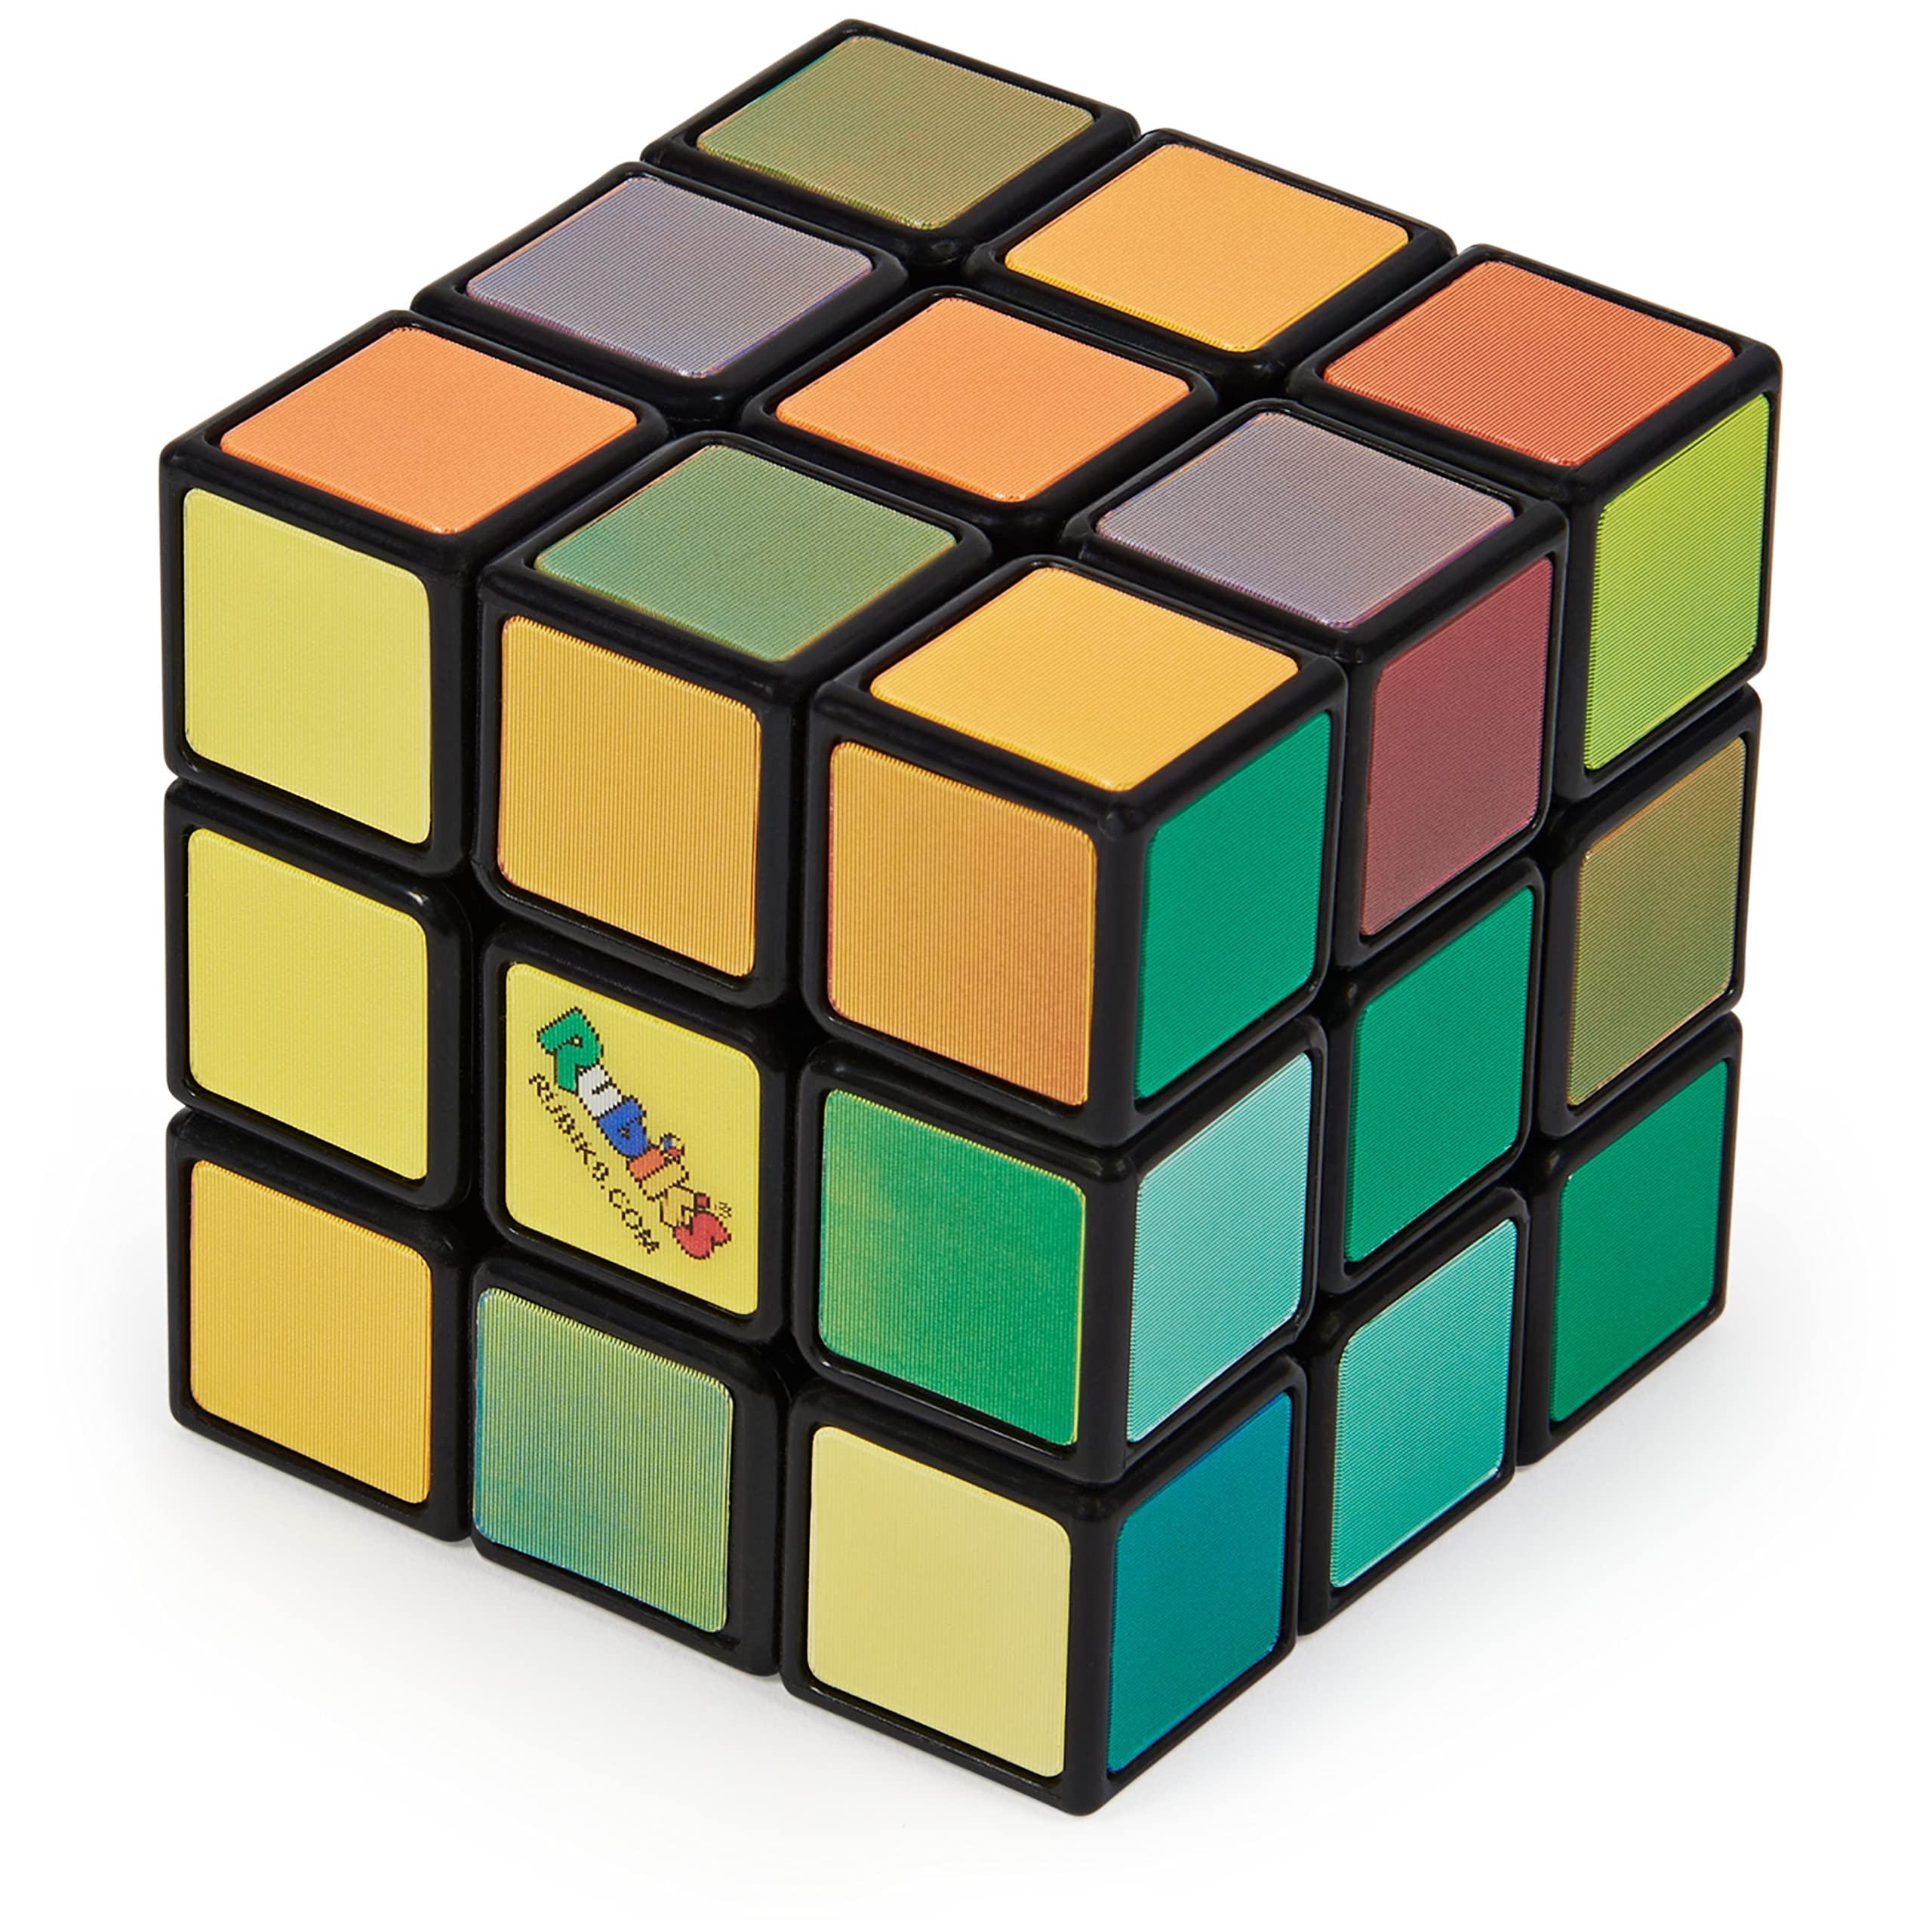 Rubik's Impossible, The Original 3x3 Cube Advanced Difficulty Classic Color-Matching Problem-Solving Puzzle Game Toy, for Adults & Kids Ages 8 and up